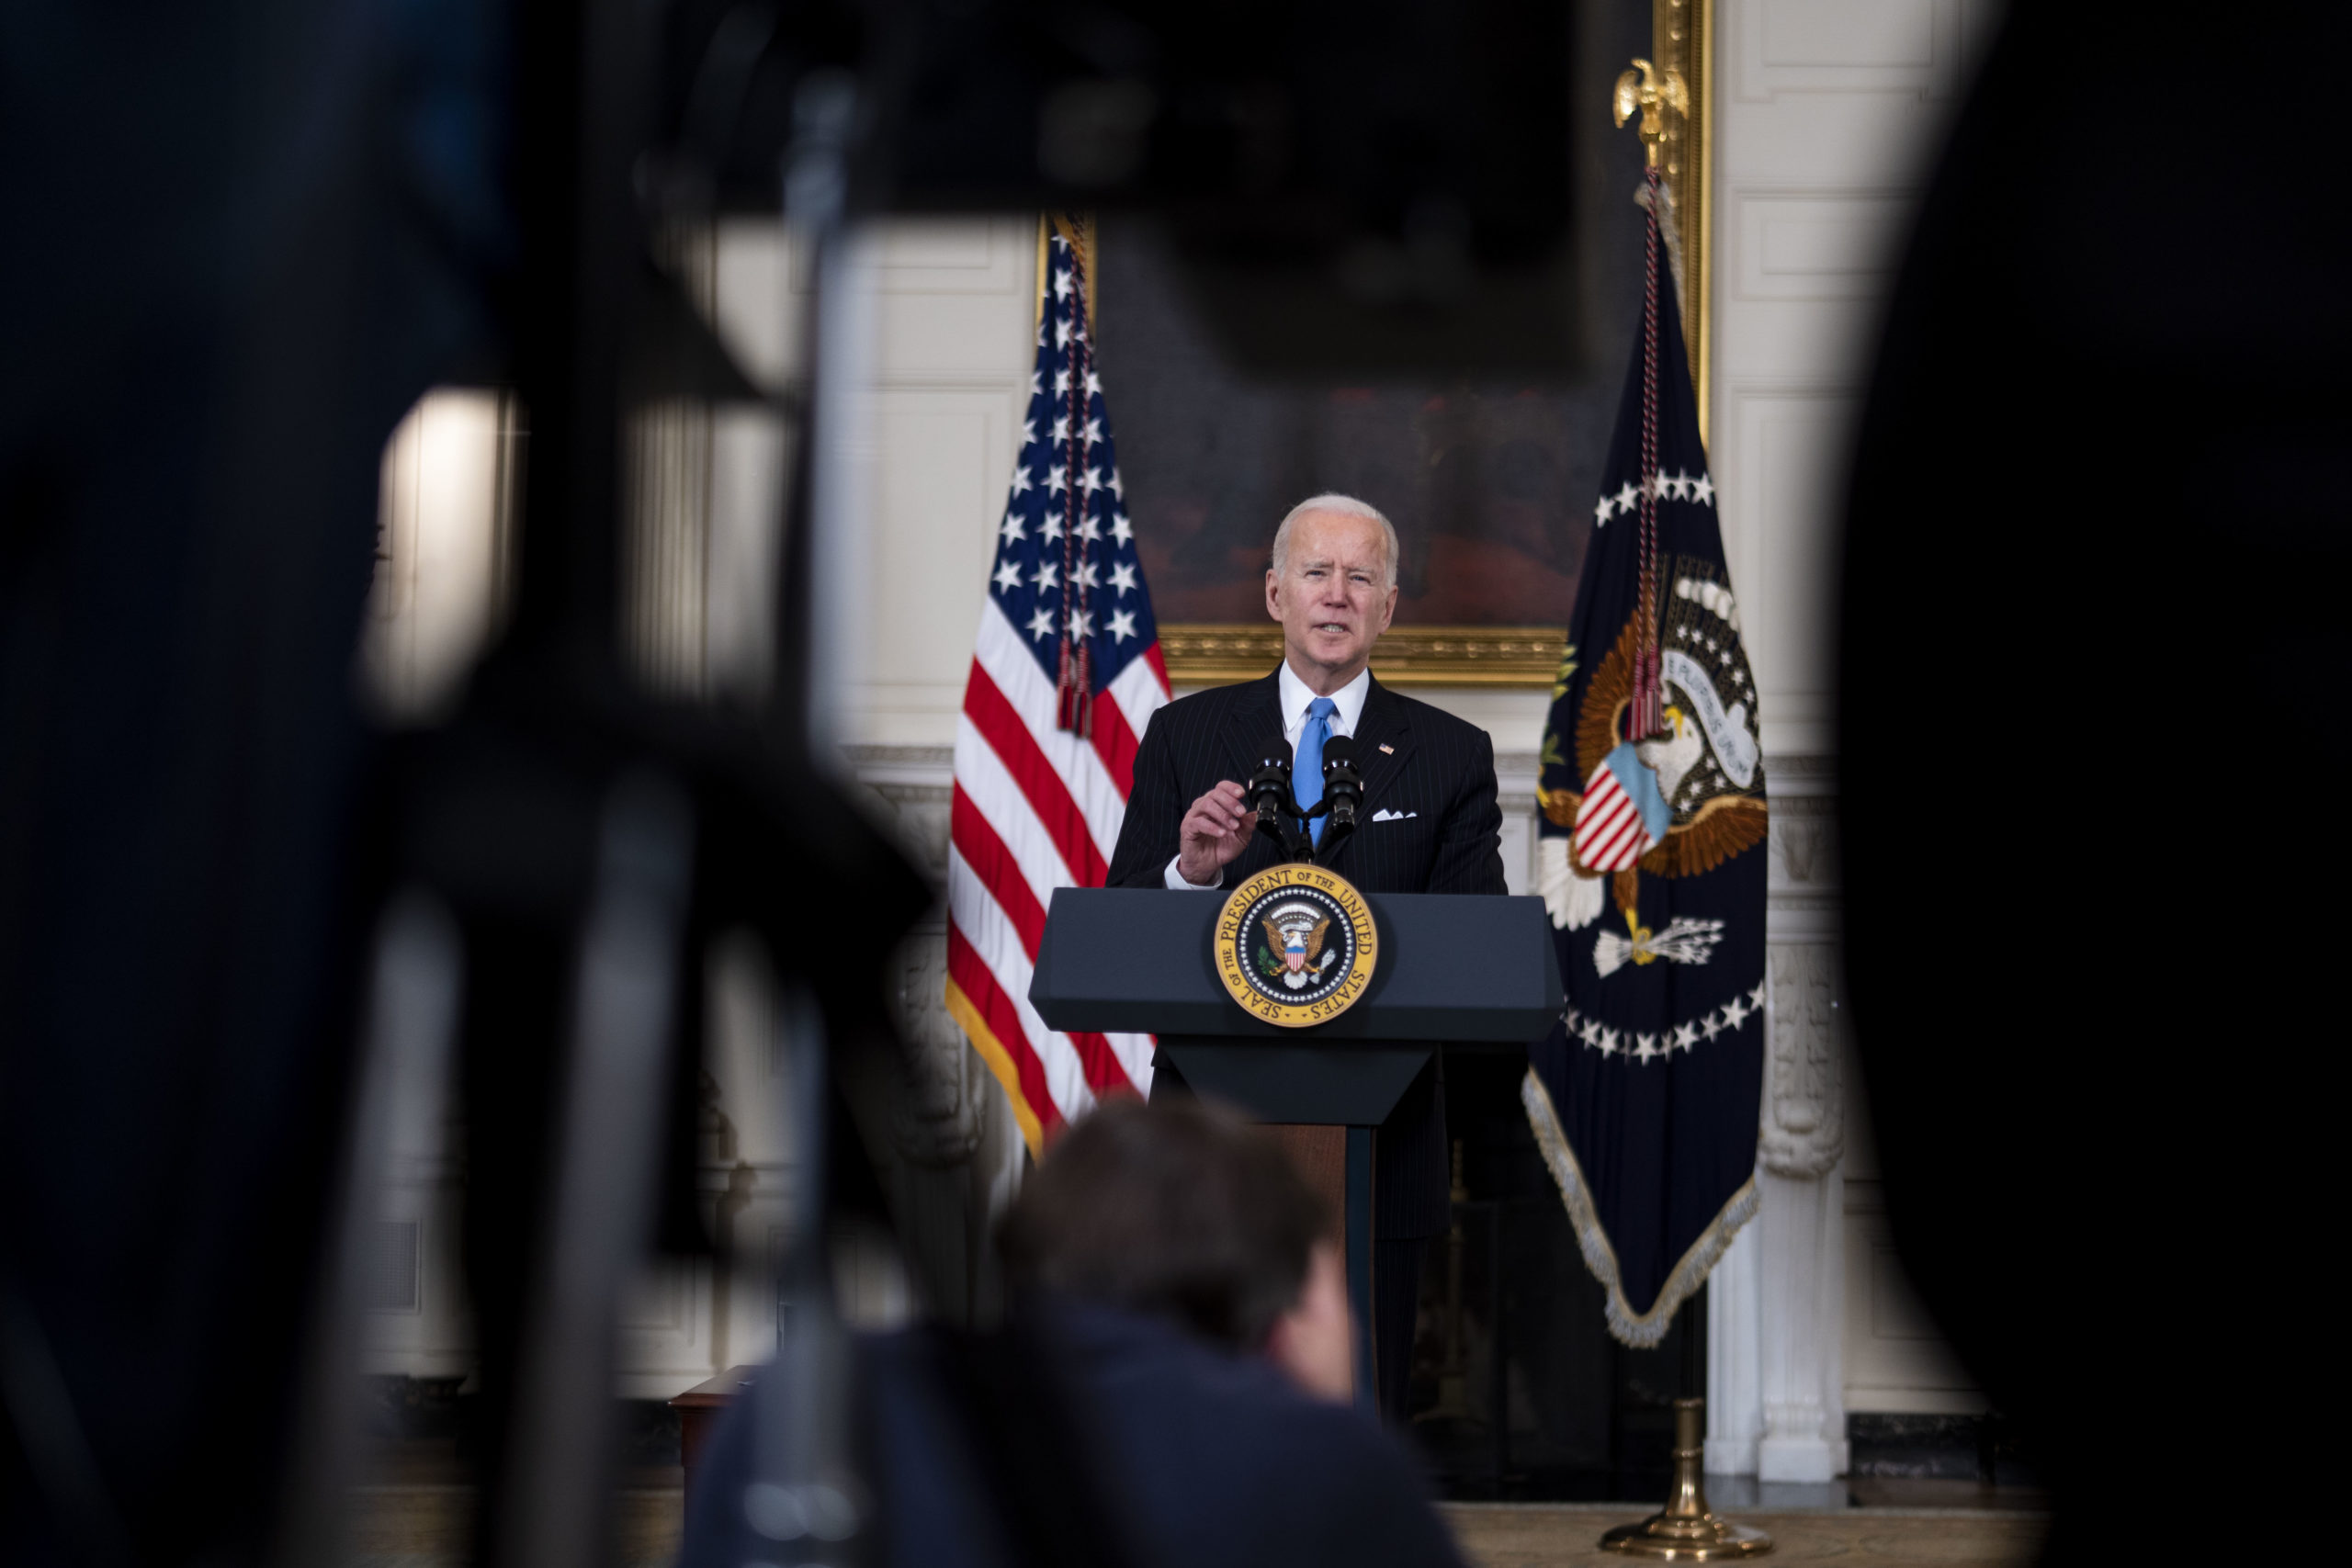 WASHINGTON, DC - MARCH 2: U.S. President Joe Biden speaks in the State Dining Room of the White House on March 2, 2021 in Washington, DC. President Biden spoke about the recently announced partnership between Johnson & Johnson and Merck to produce more J&J COVID-19 vaccine. (Photo by Doug Mills-Pool/Getty Images)